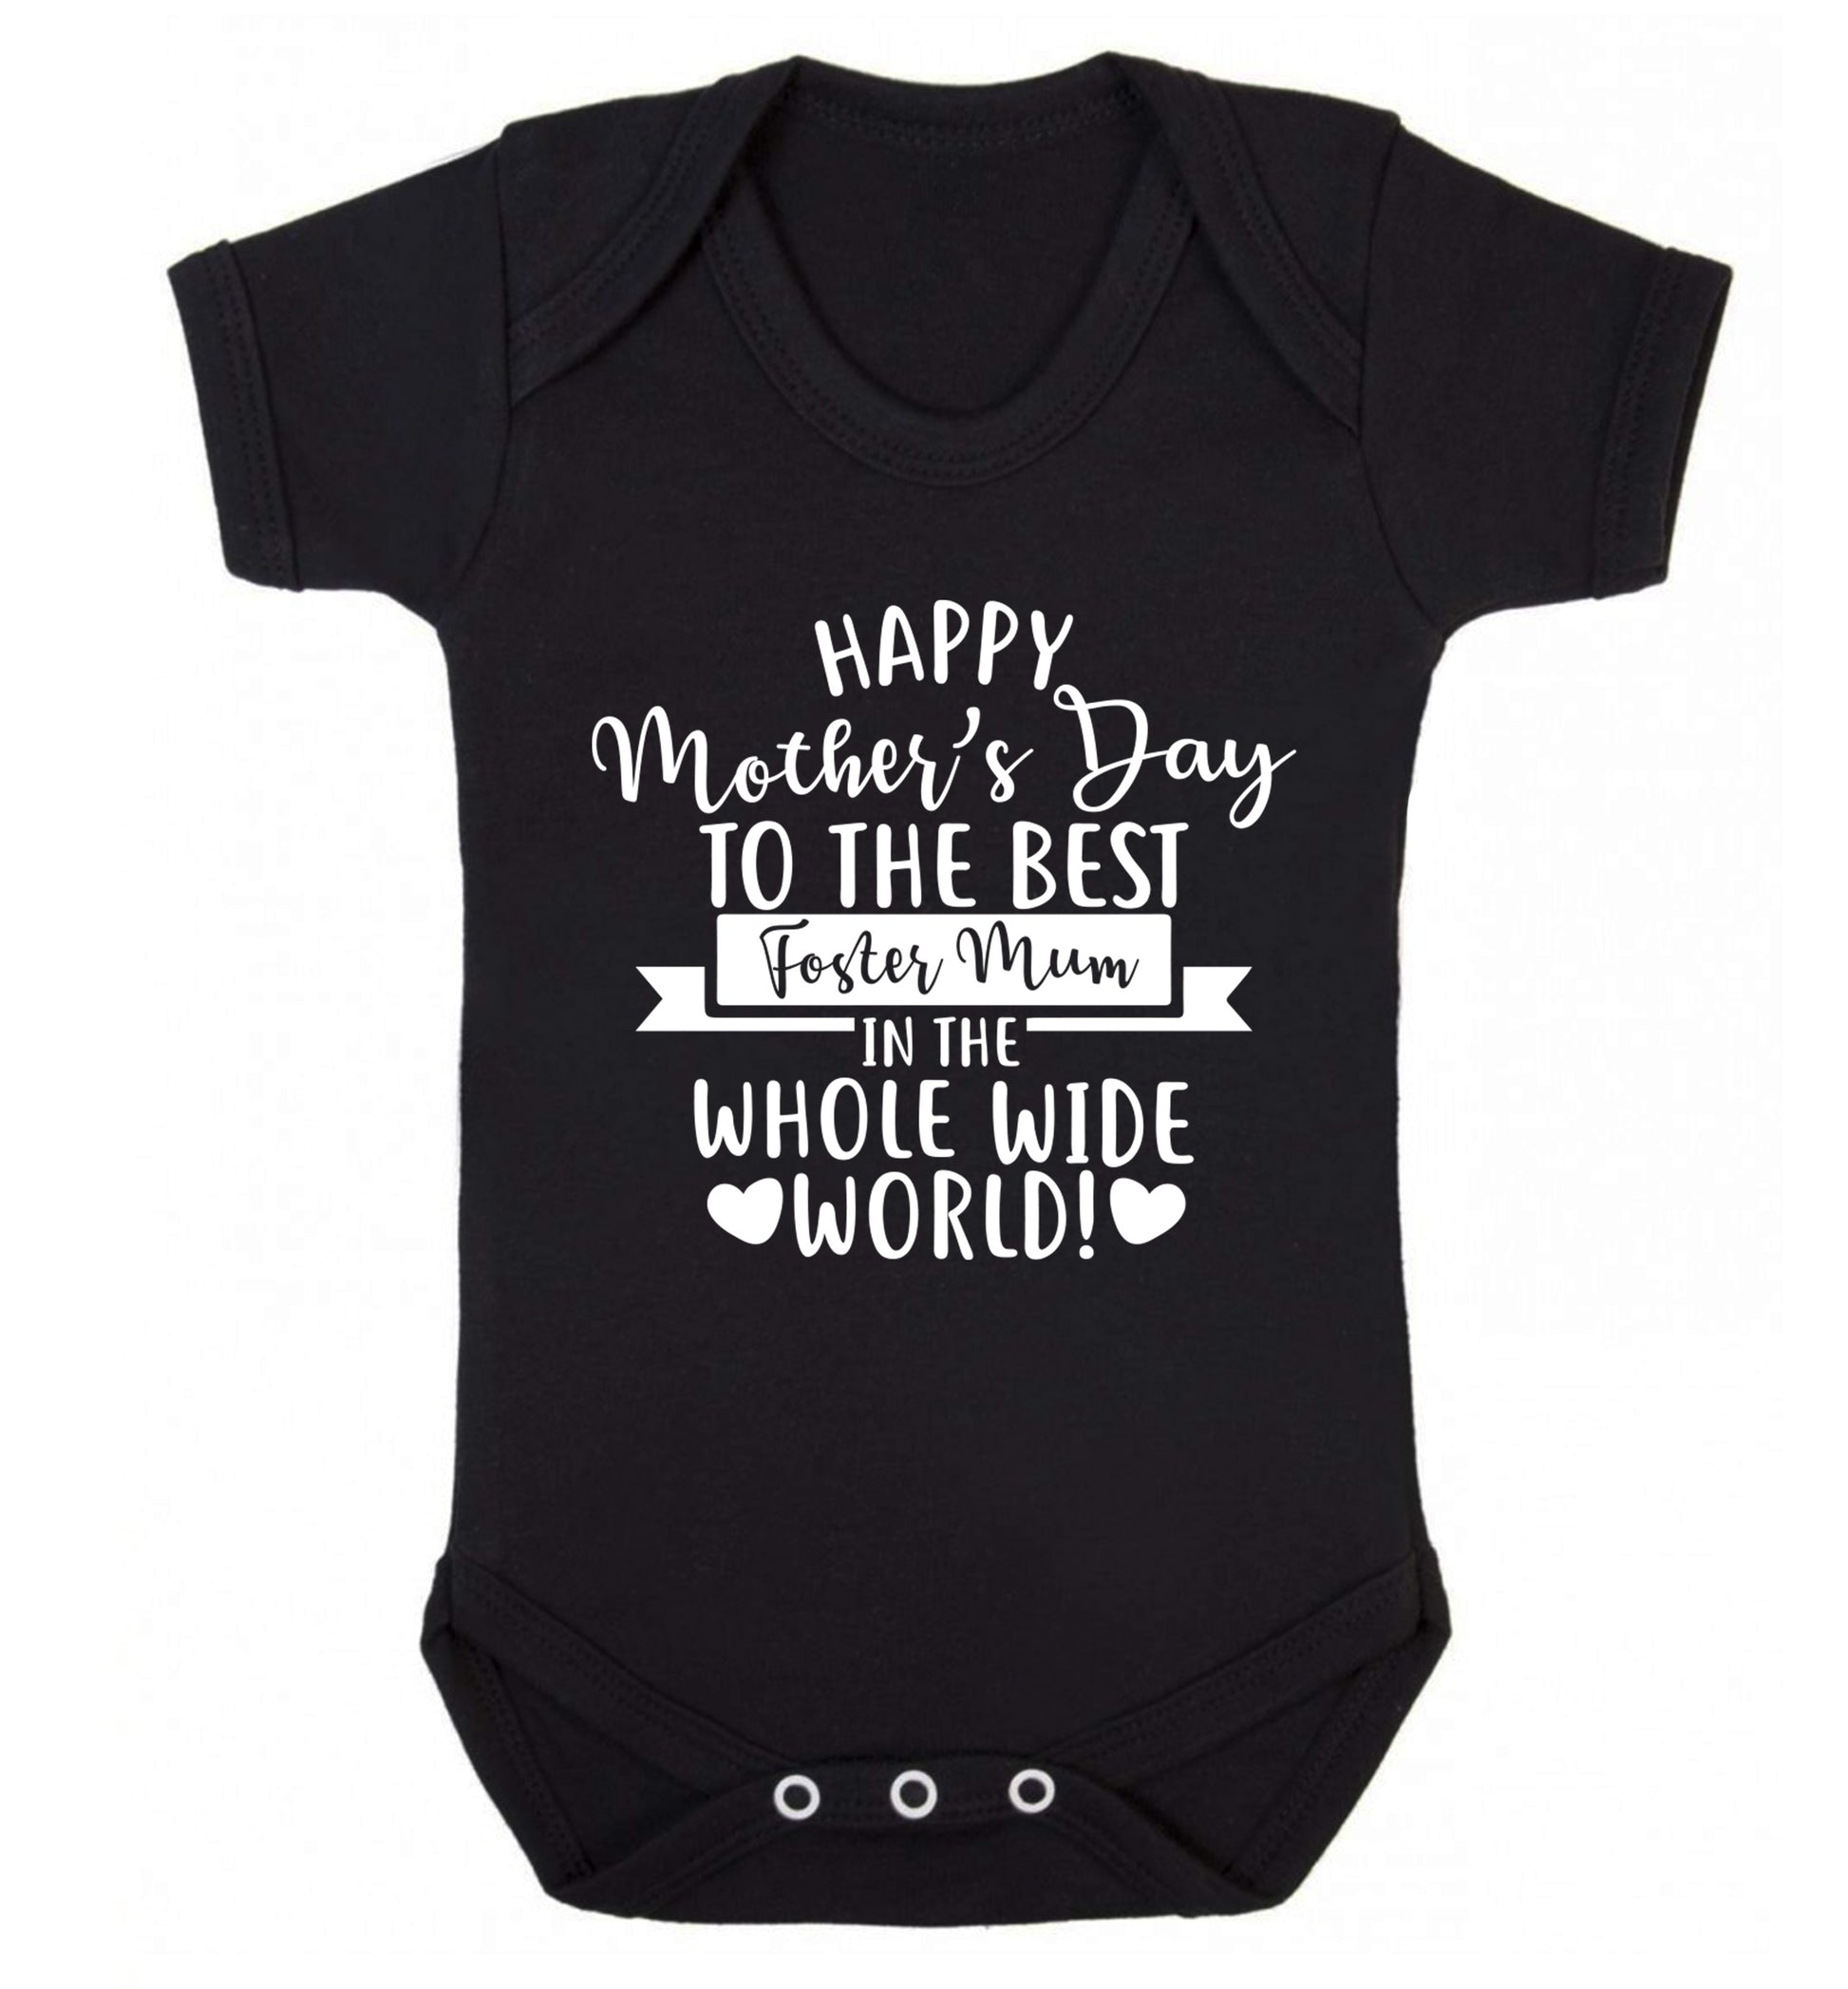 Happy mother's day to the best foster mum in the world Baby Vest black 18-24 months